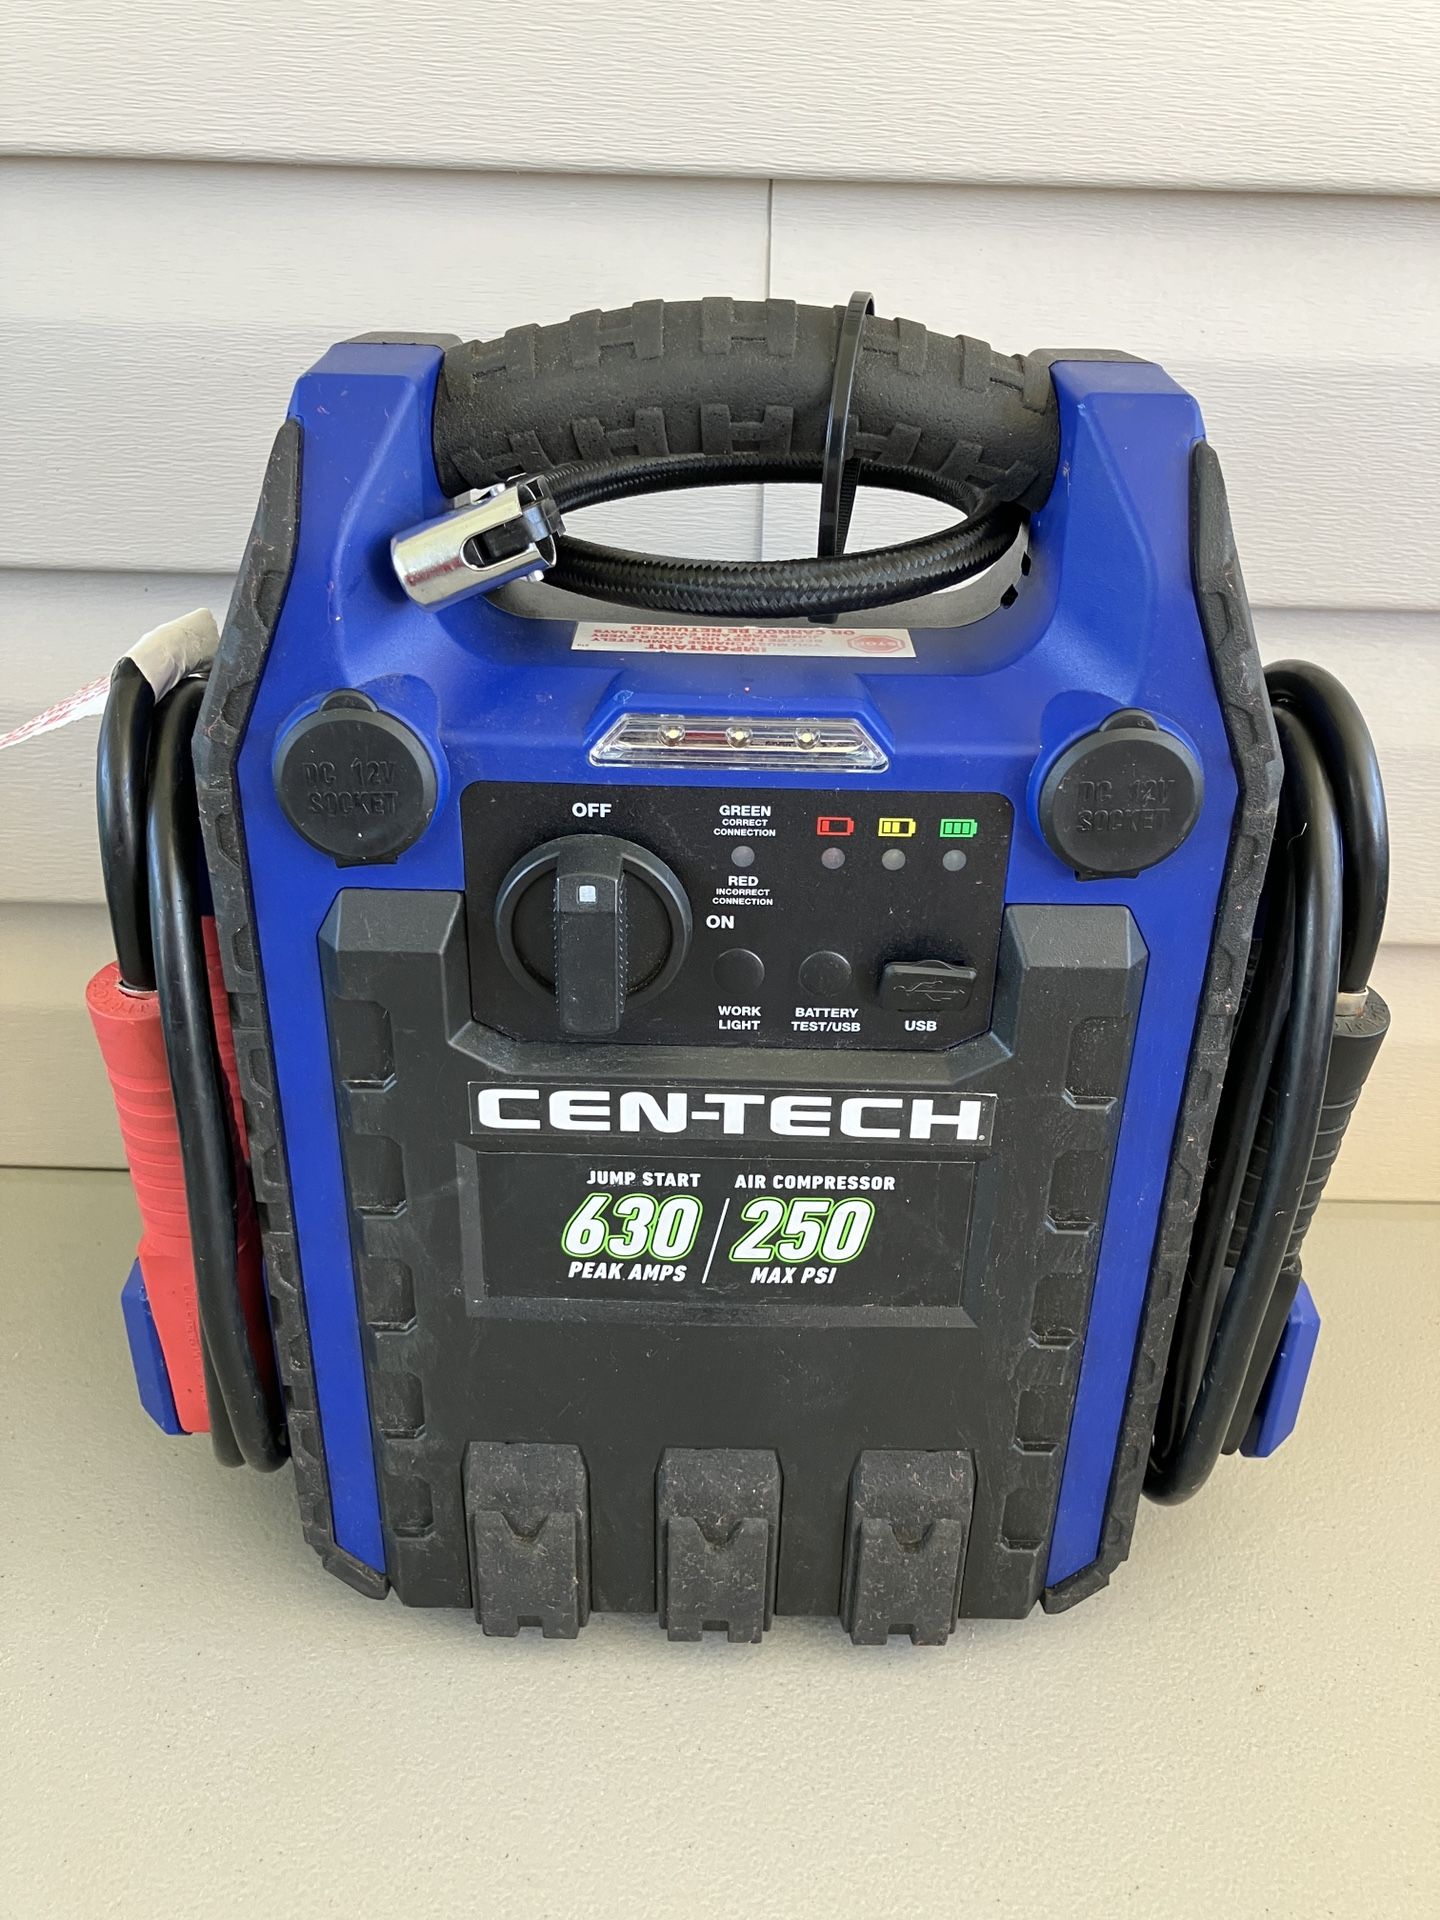 CEN-TECH 630 Peak Amp Portable Car Battery Jump Starter and Power Pack with 150 PSI Air Compressor